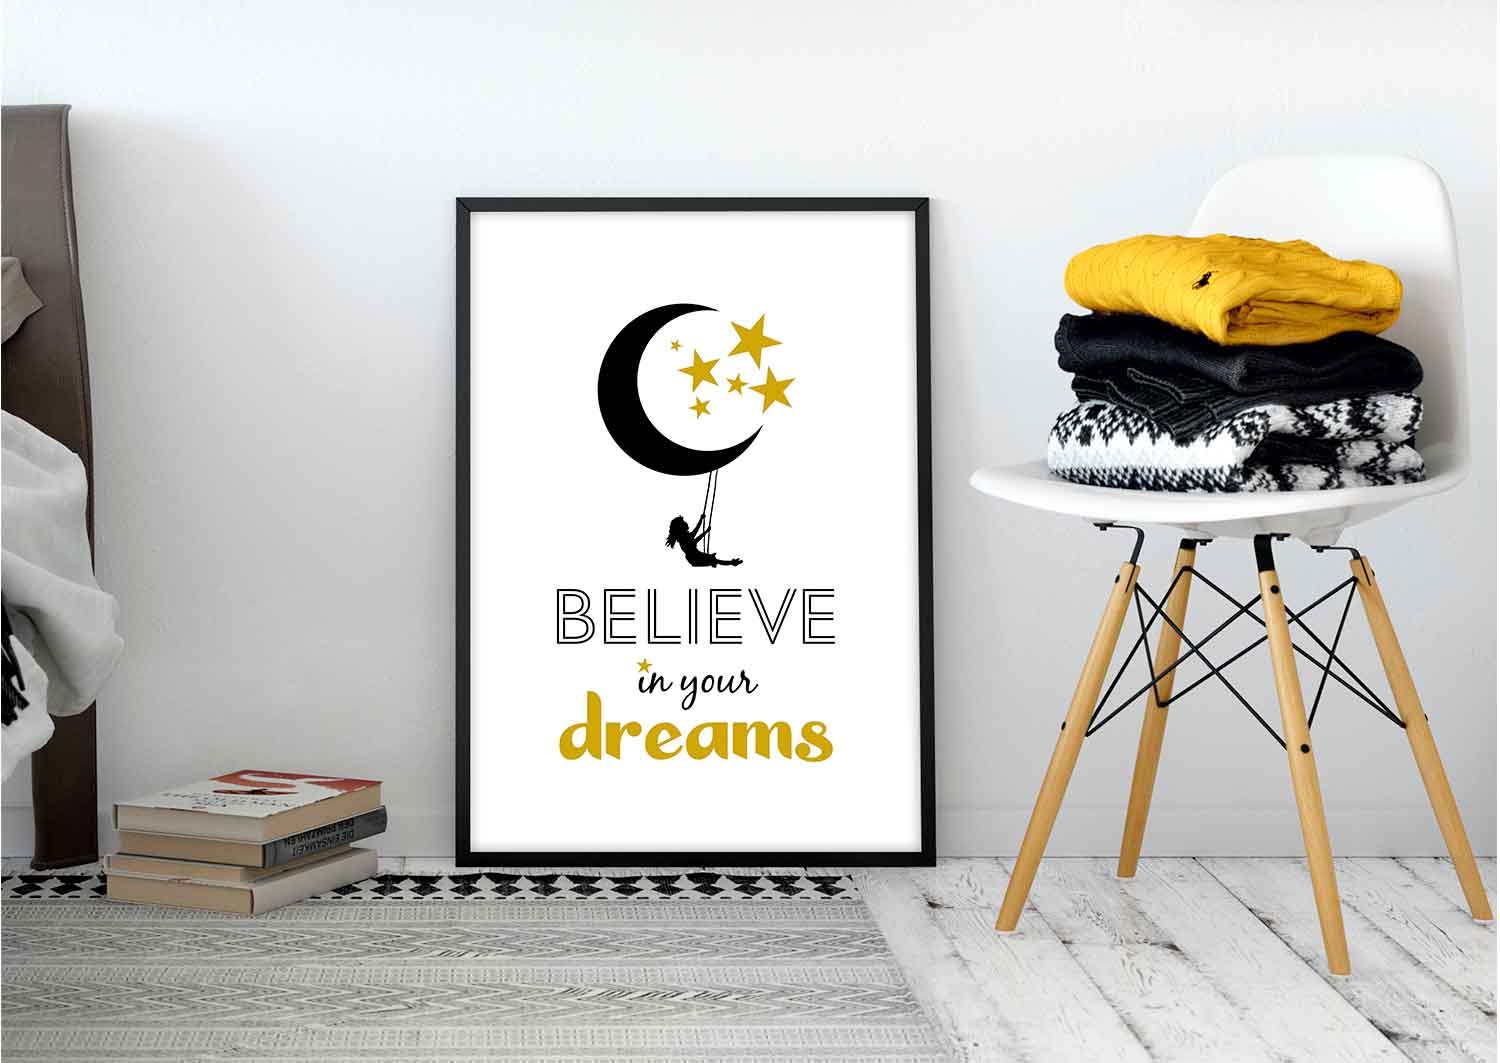 Image 1 - Believe in your Dreams